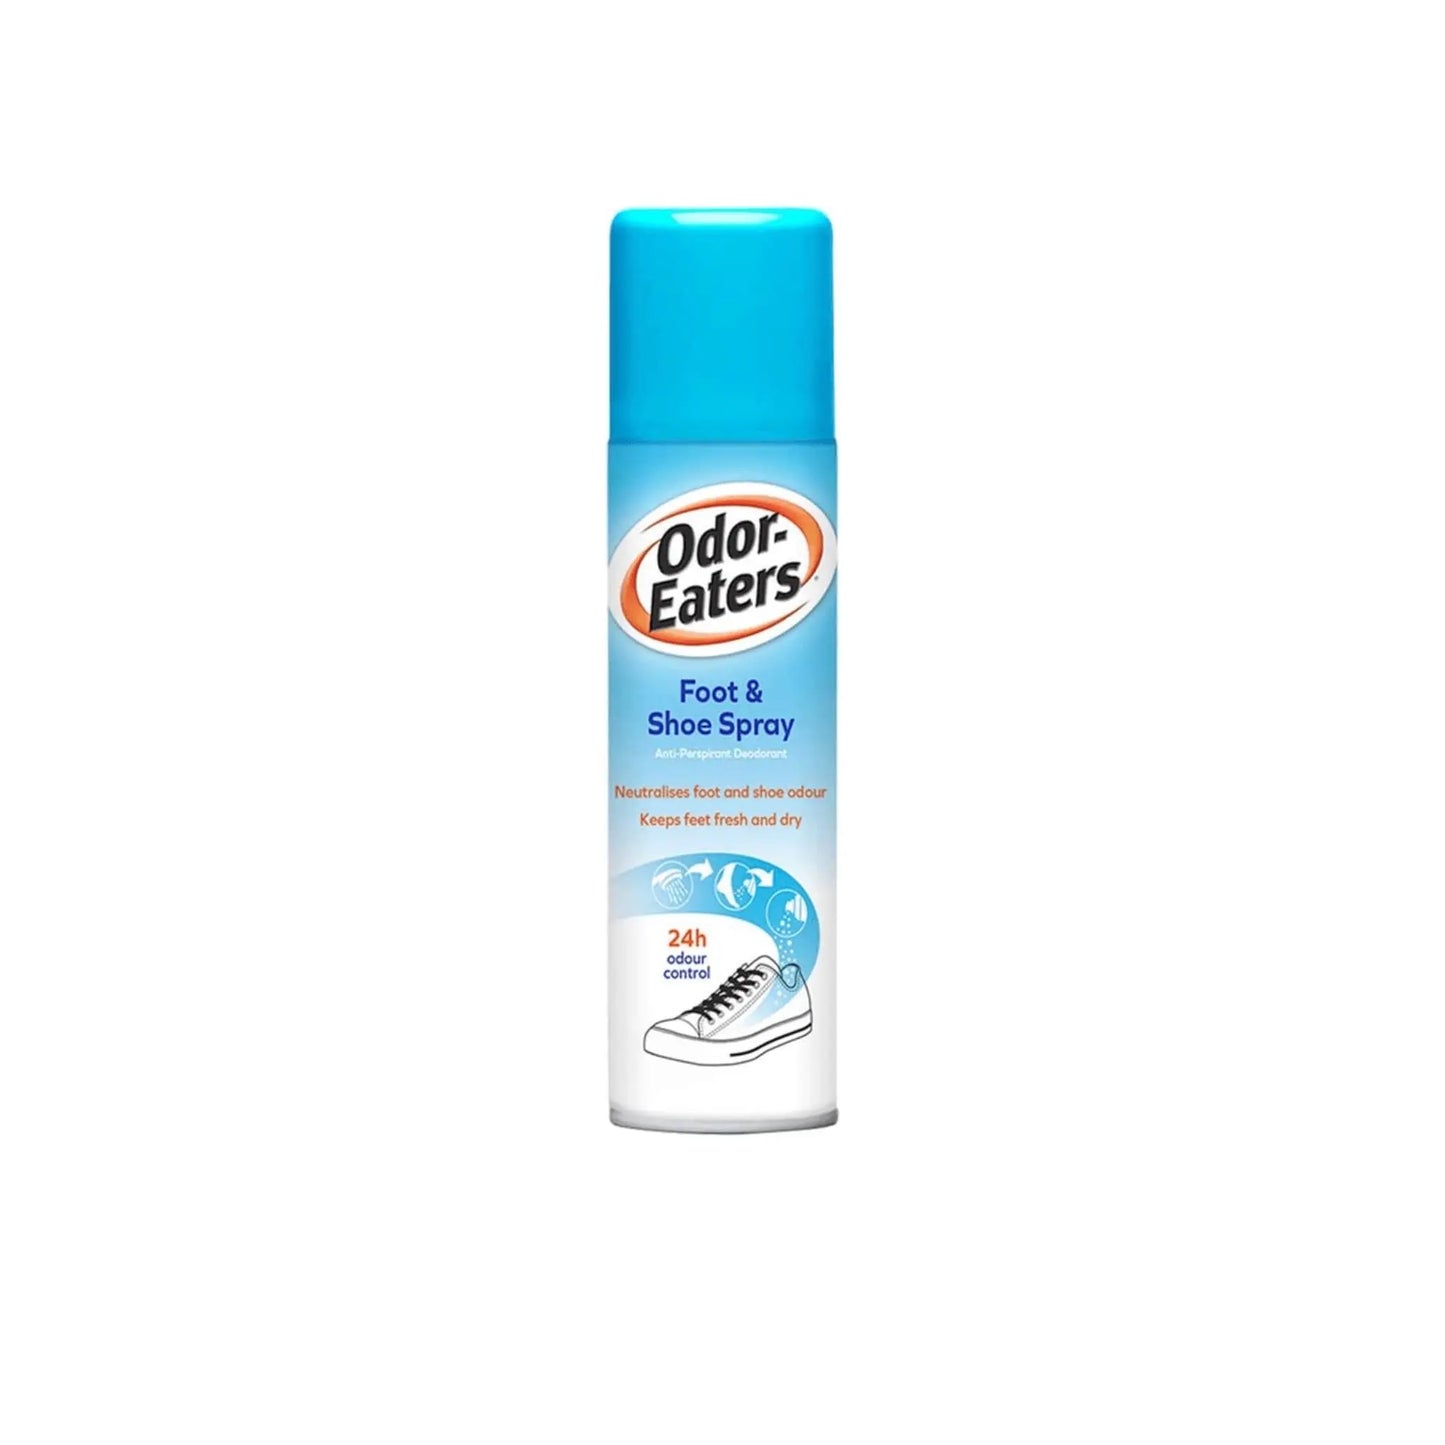 Odor Eaters Foot and Shoe Spray